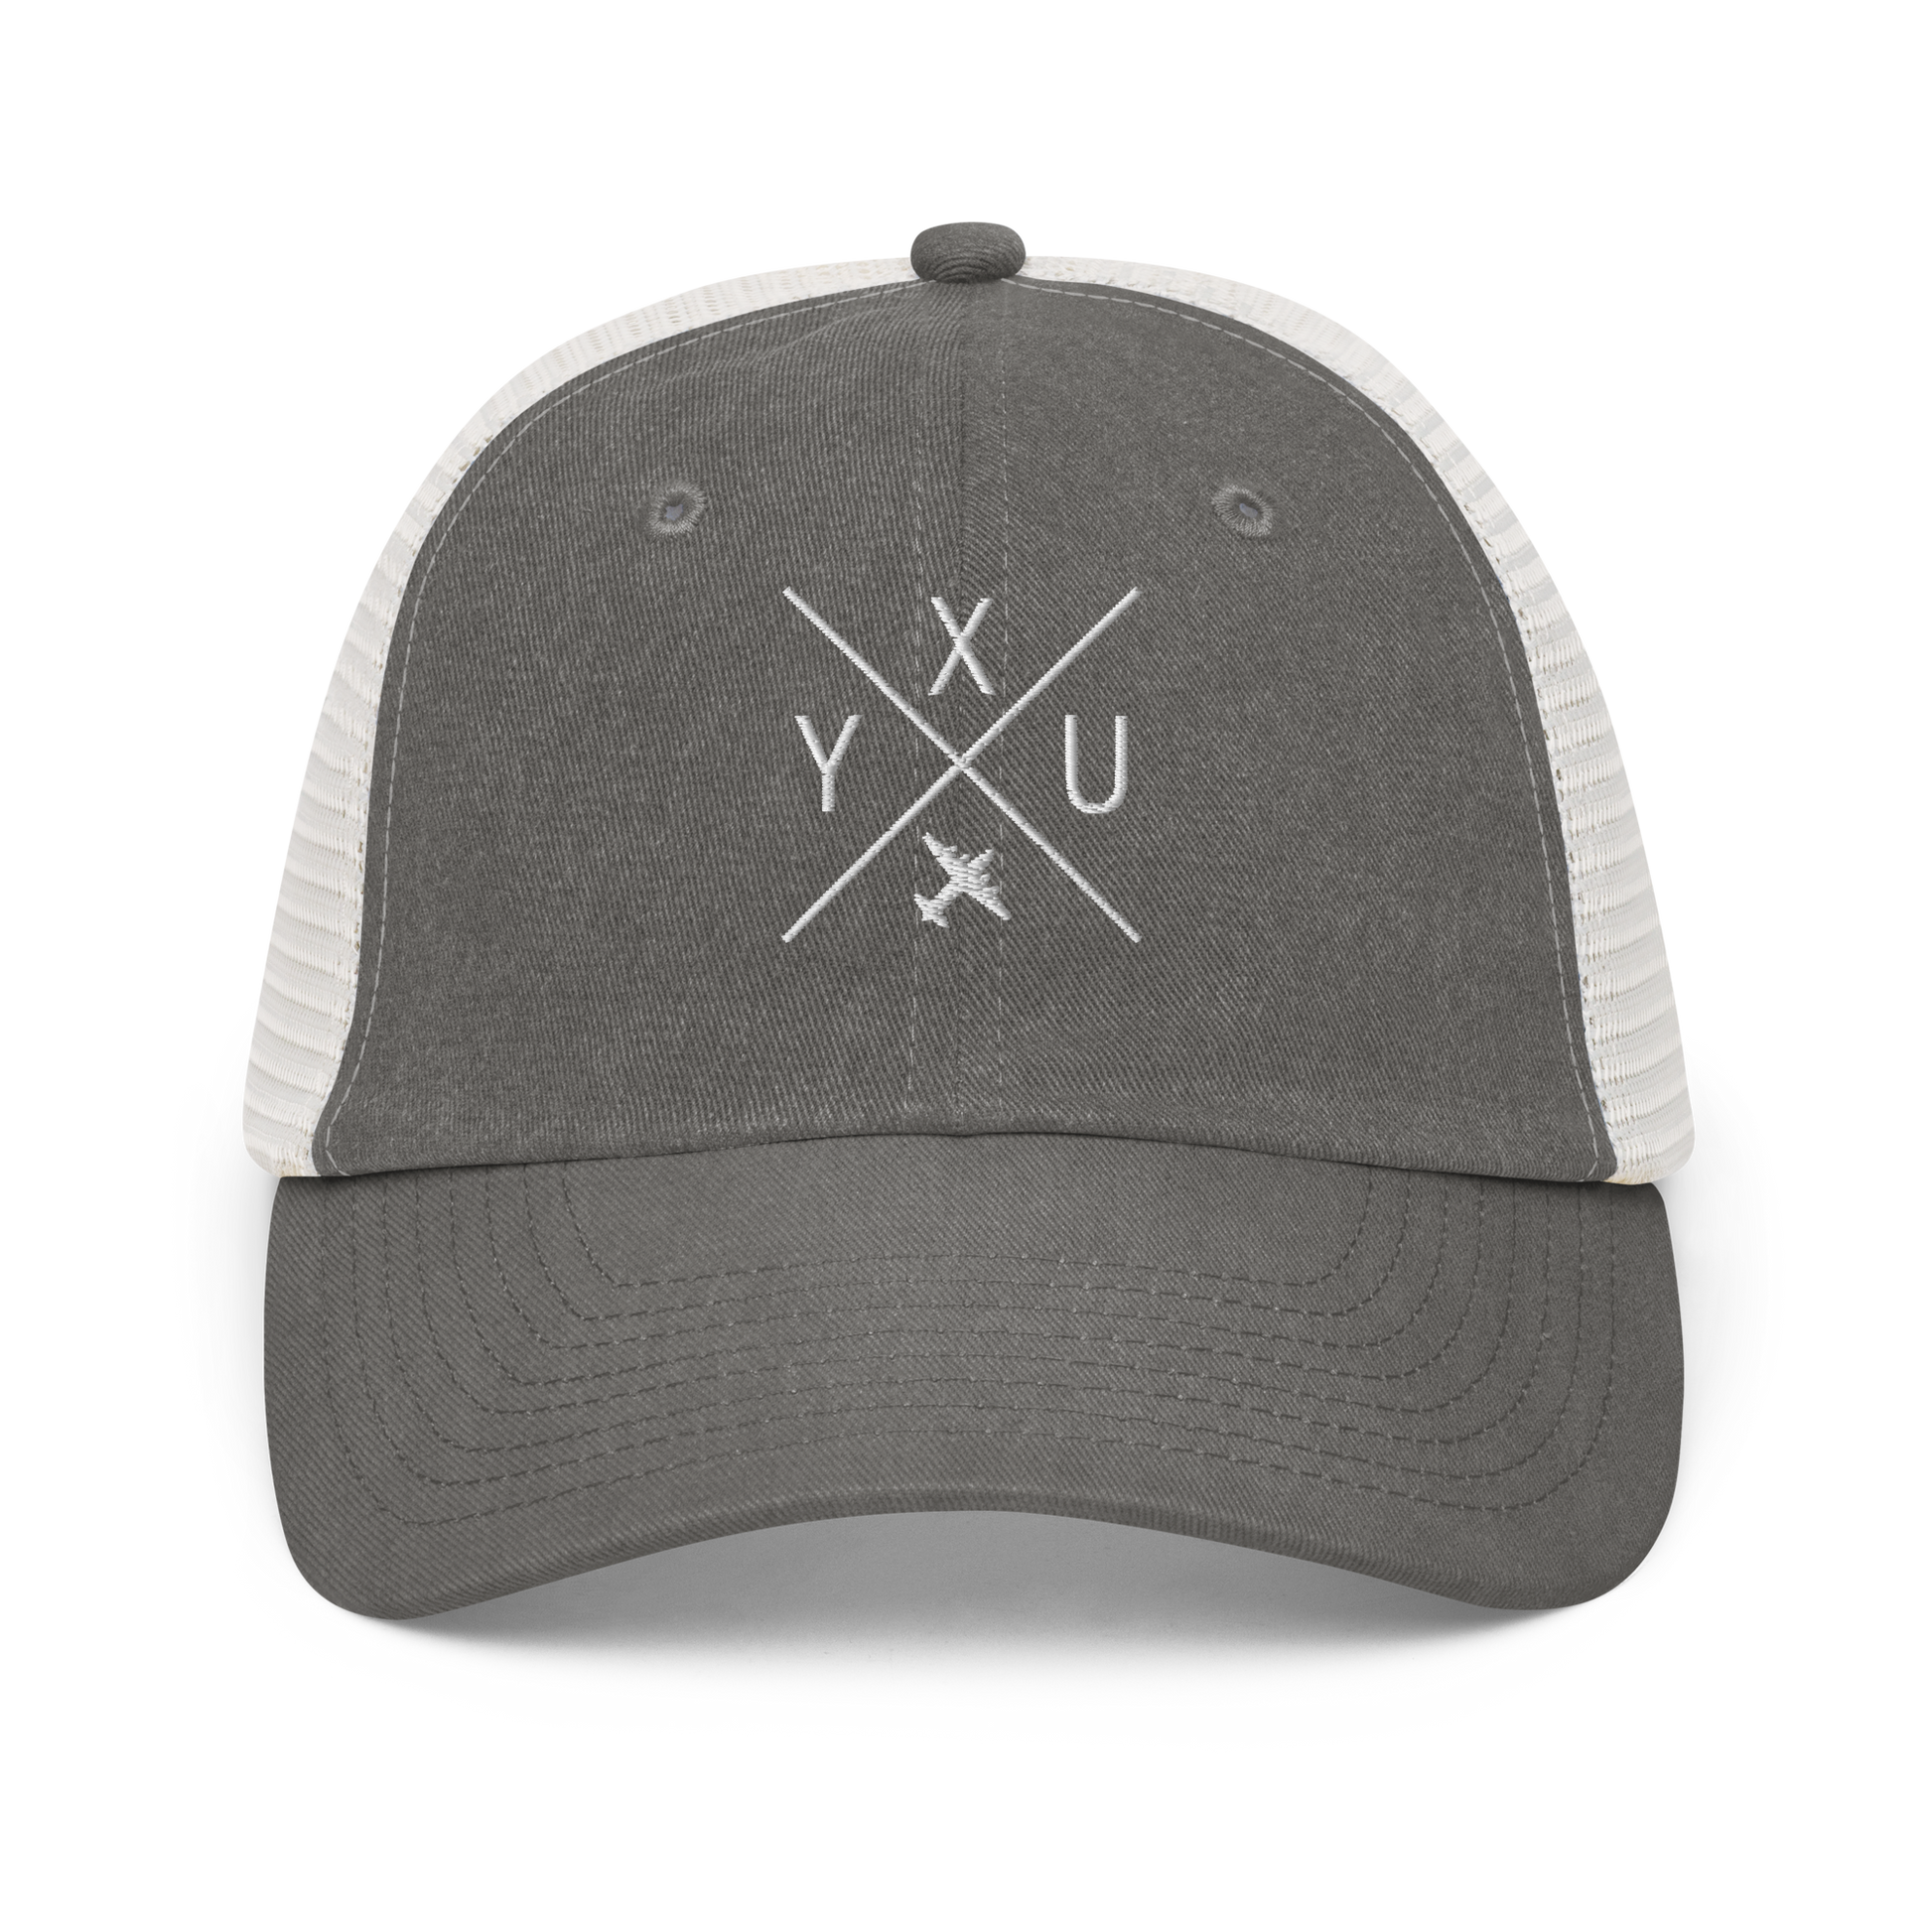 YHM Designs - YXU London Pigment-Dyed Trucker Cap - Crossed-X Design with Airport Code and Vintage Propliner - White Embroidery - Image 09